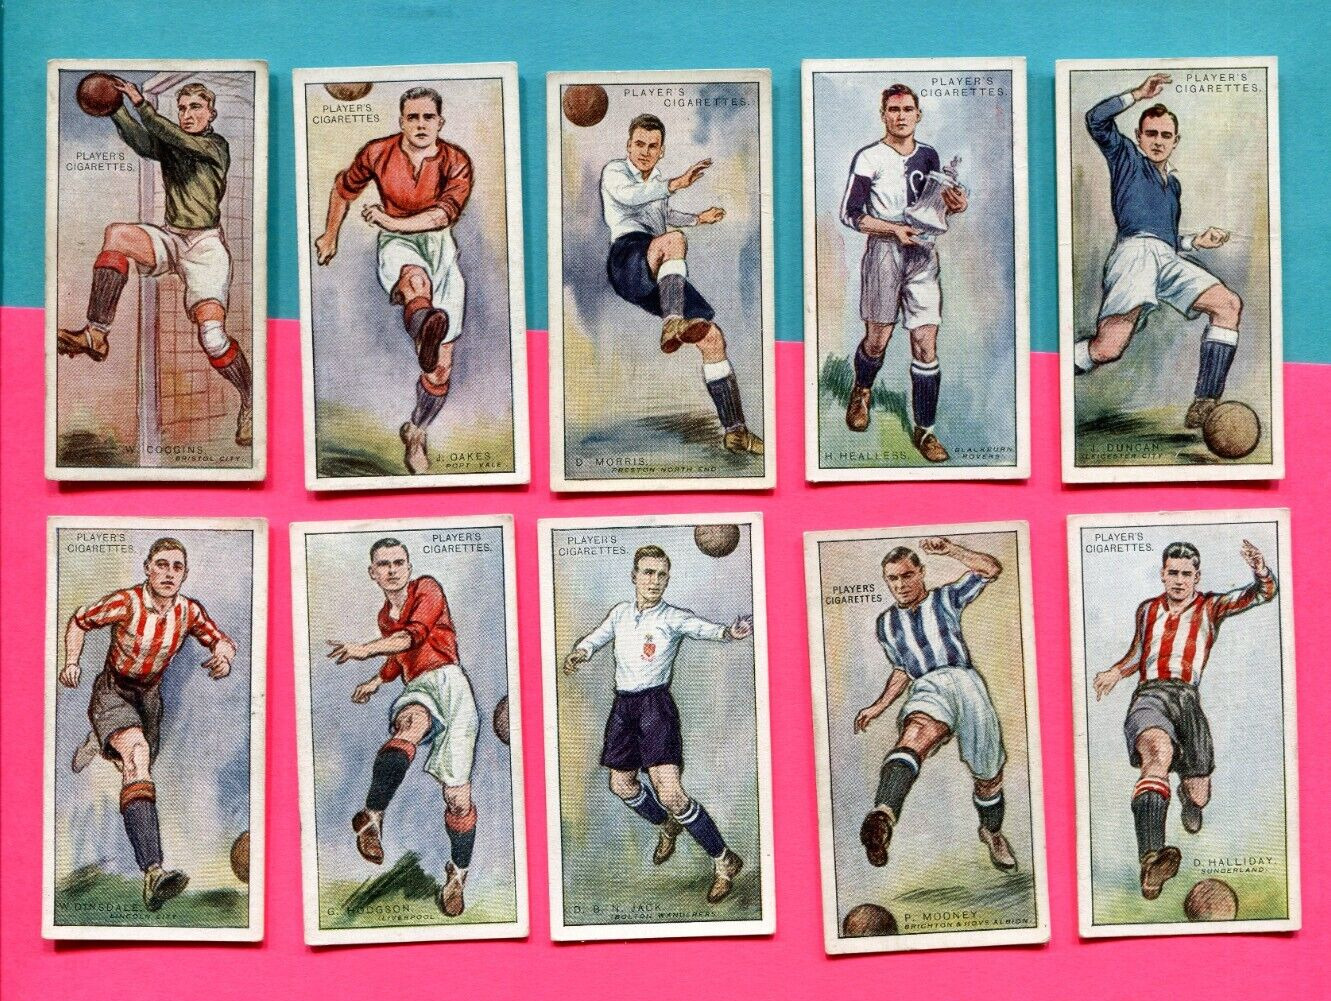 1928 JOHN PLAYER & SONS CIGARETTES FOOTBALLERS 1928 TOBACCO 10 CARD LOT